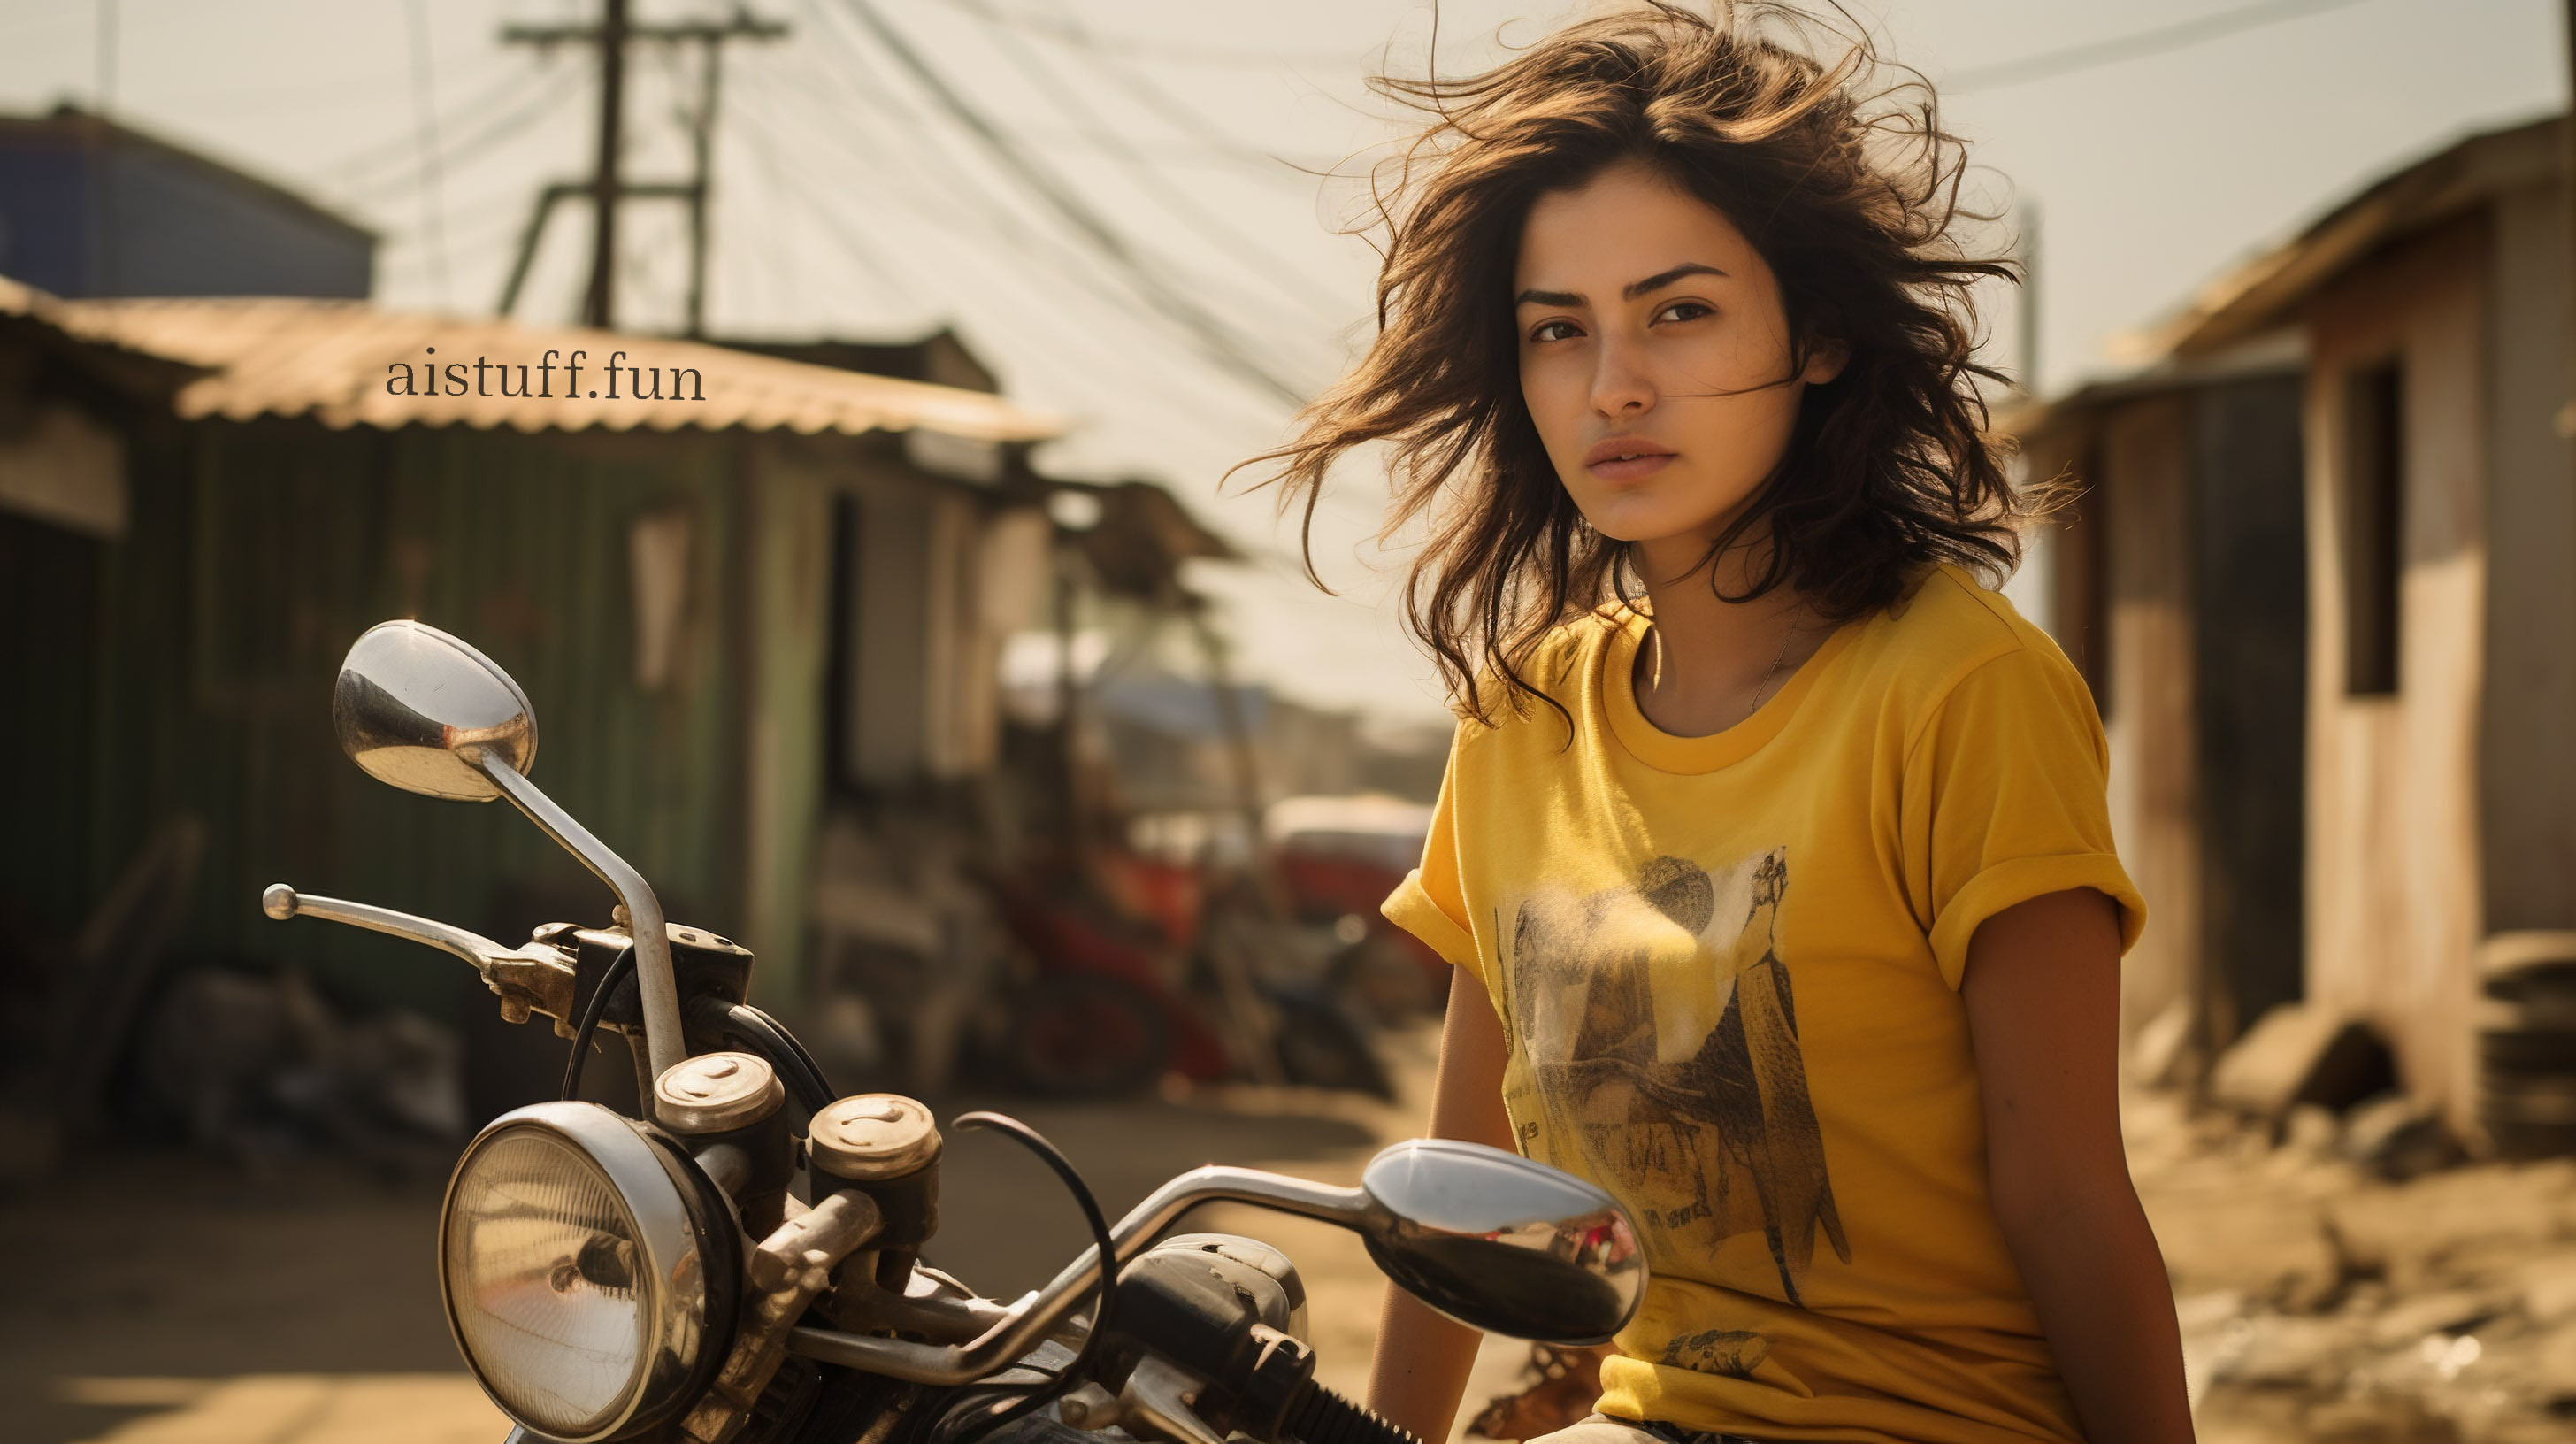 Beautiful girl on a motorcycle with short hair fluttering in the wind